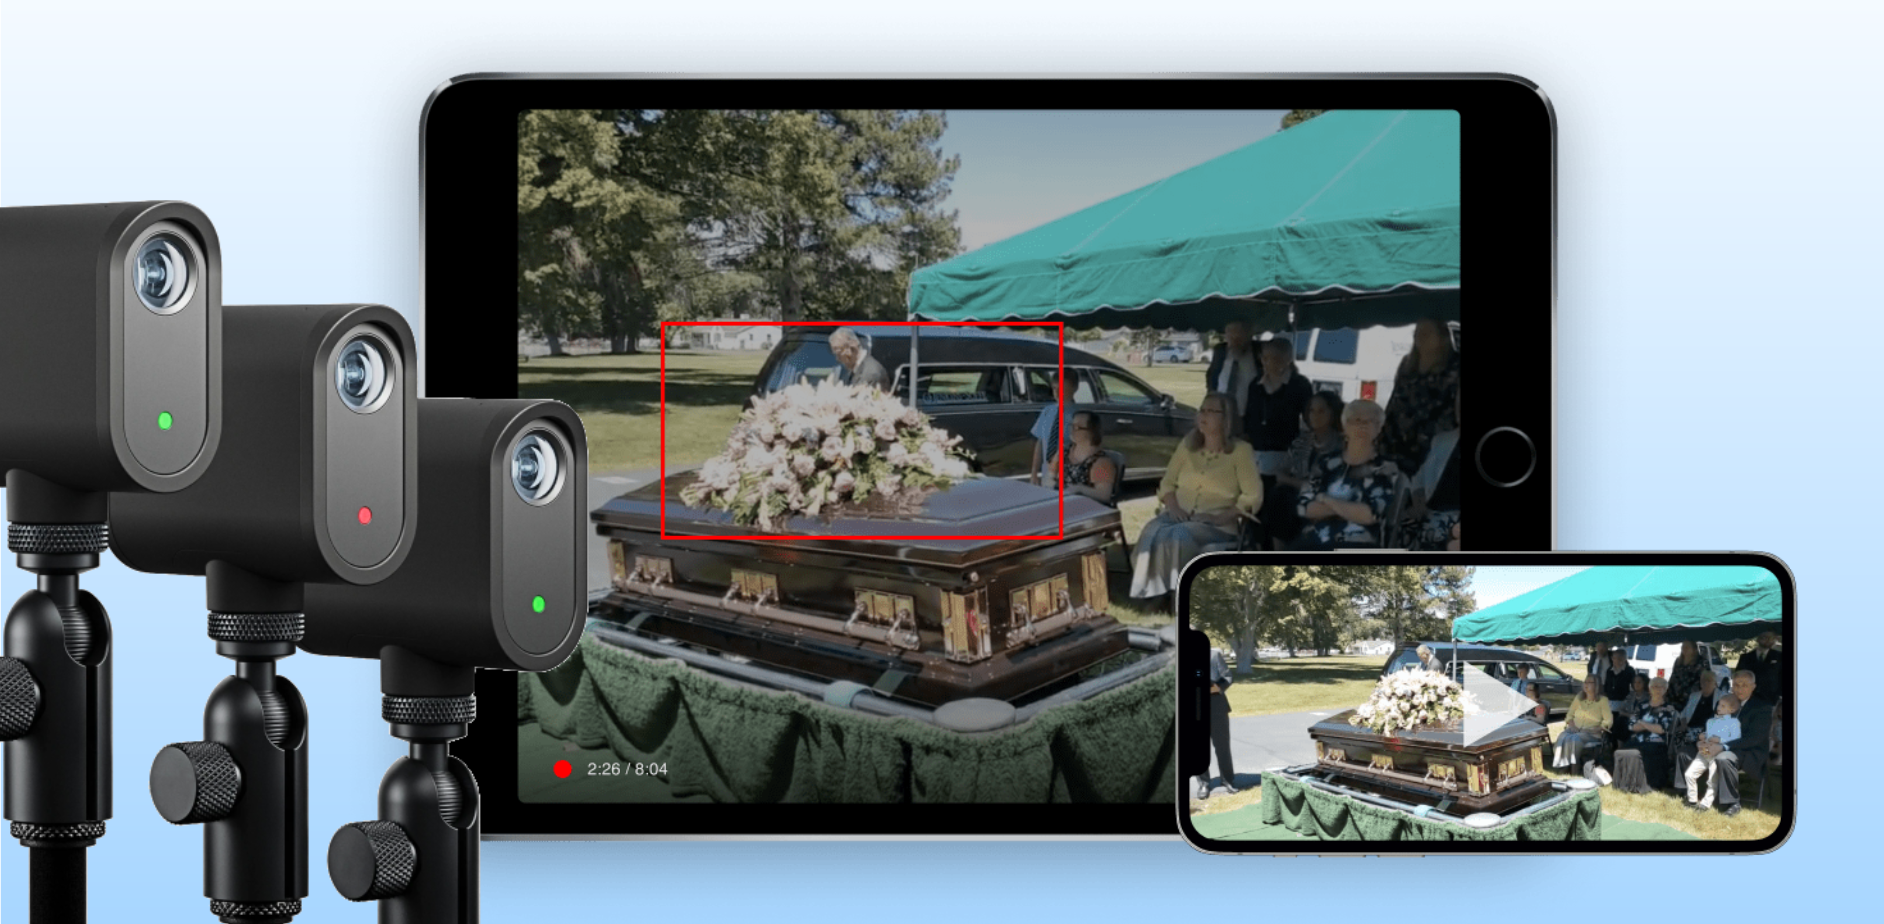 Allow guests to view funeral services digitally by offering funeral live streaming. Host every decedent's live stream on a permanent online memorial where families can honor their loved ones for years to come. Simple setup. Ongoing, detailed support.